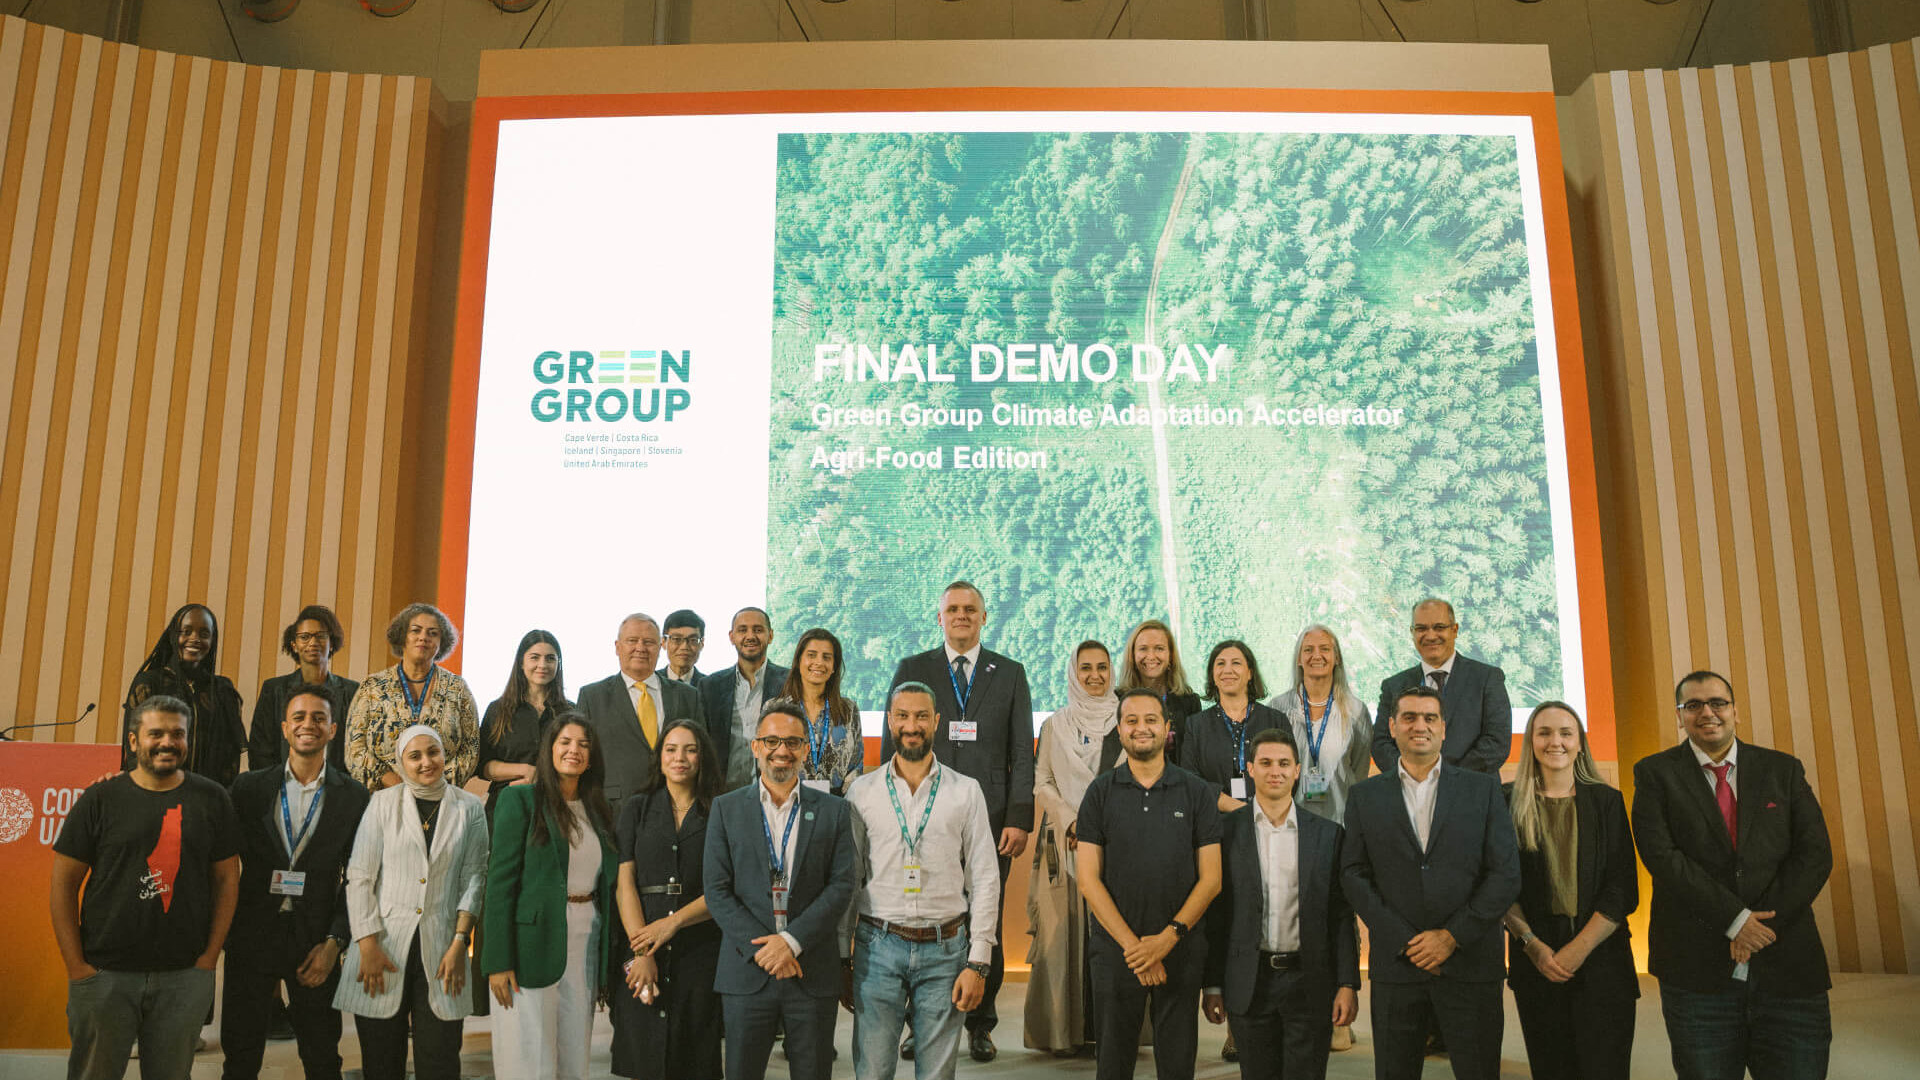 The Green Group Initiative COP28 Final Demo Day 2023 12 15